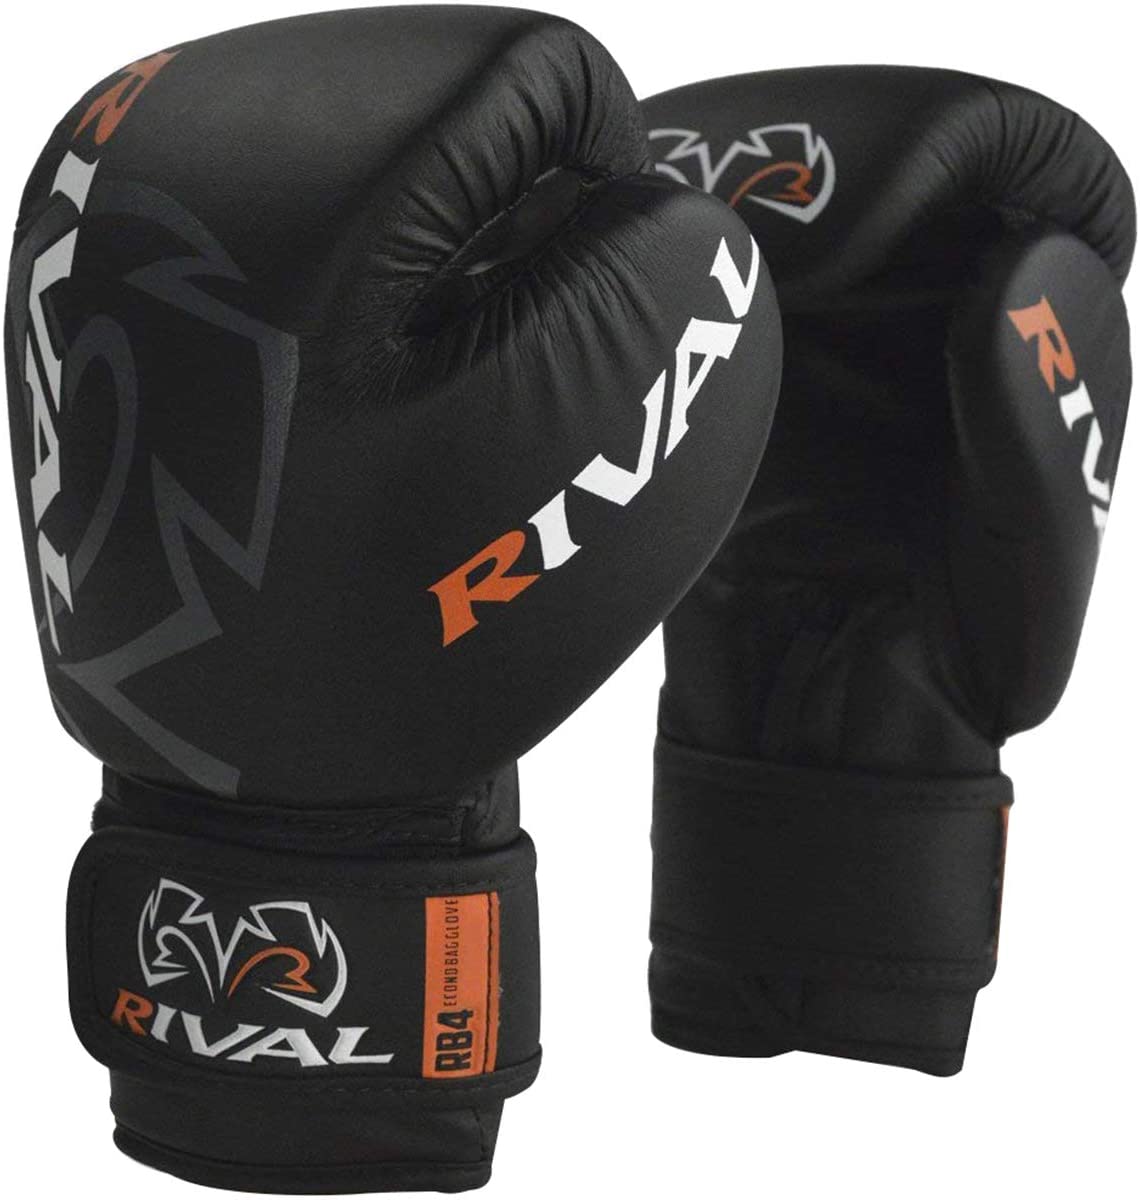 rival boxing gloves